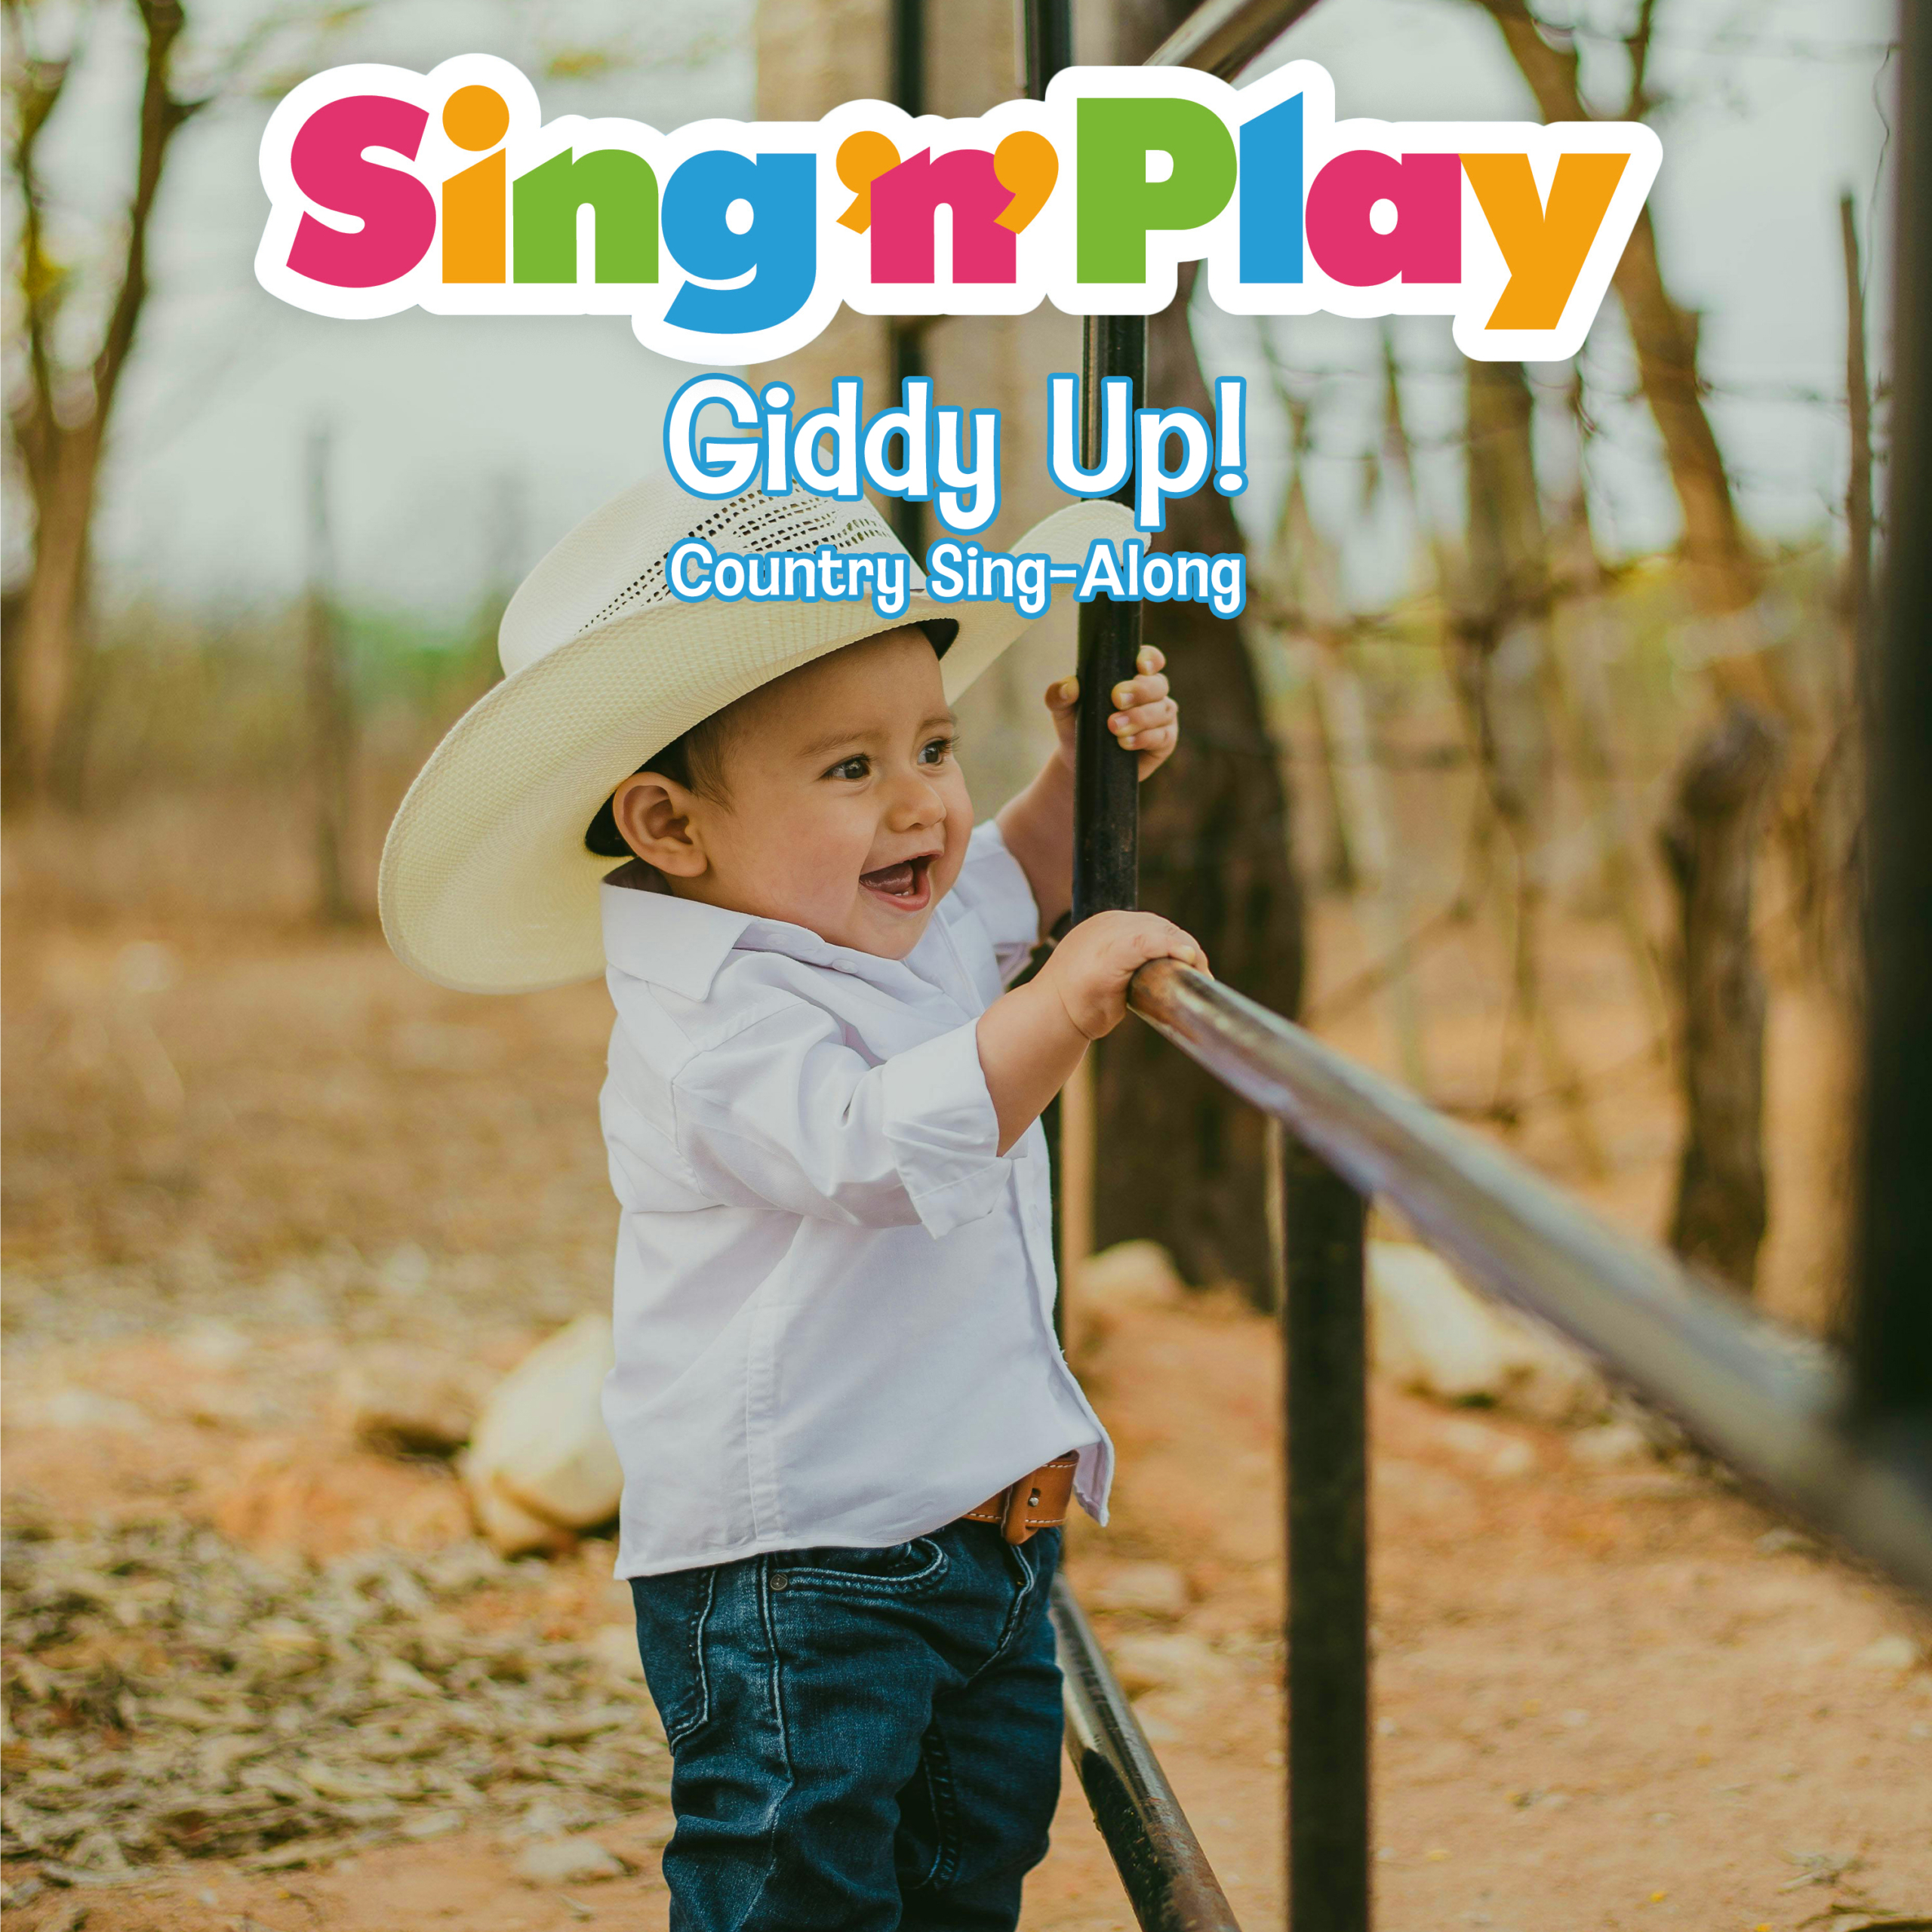 Giddy Up! Country Sing-Along